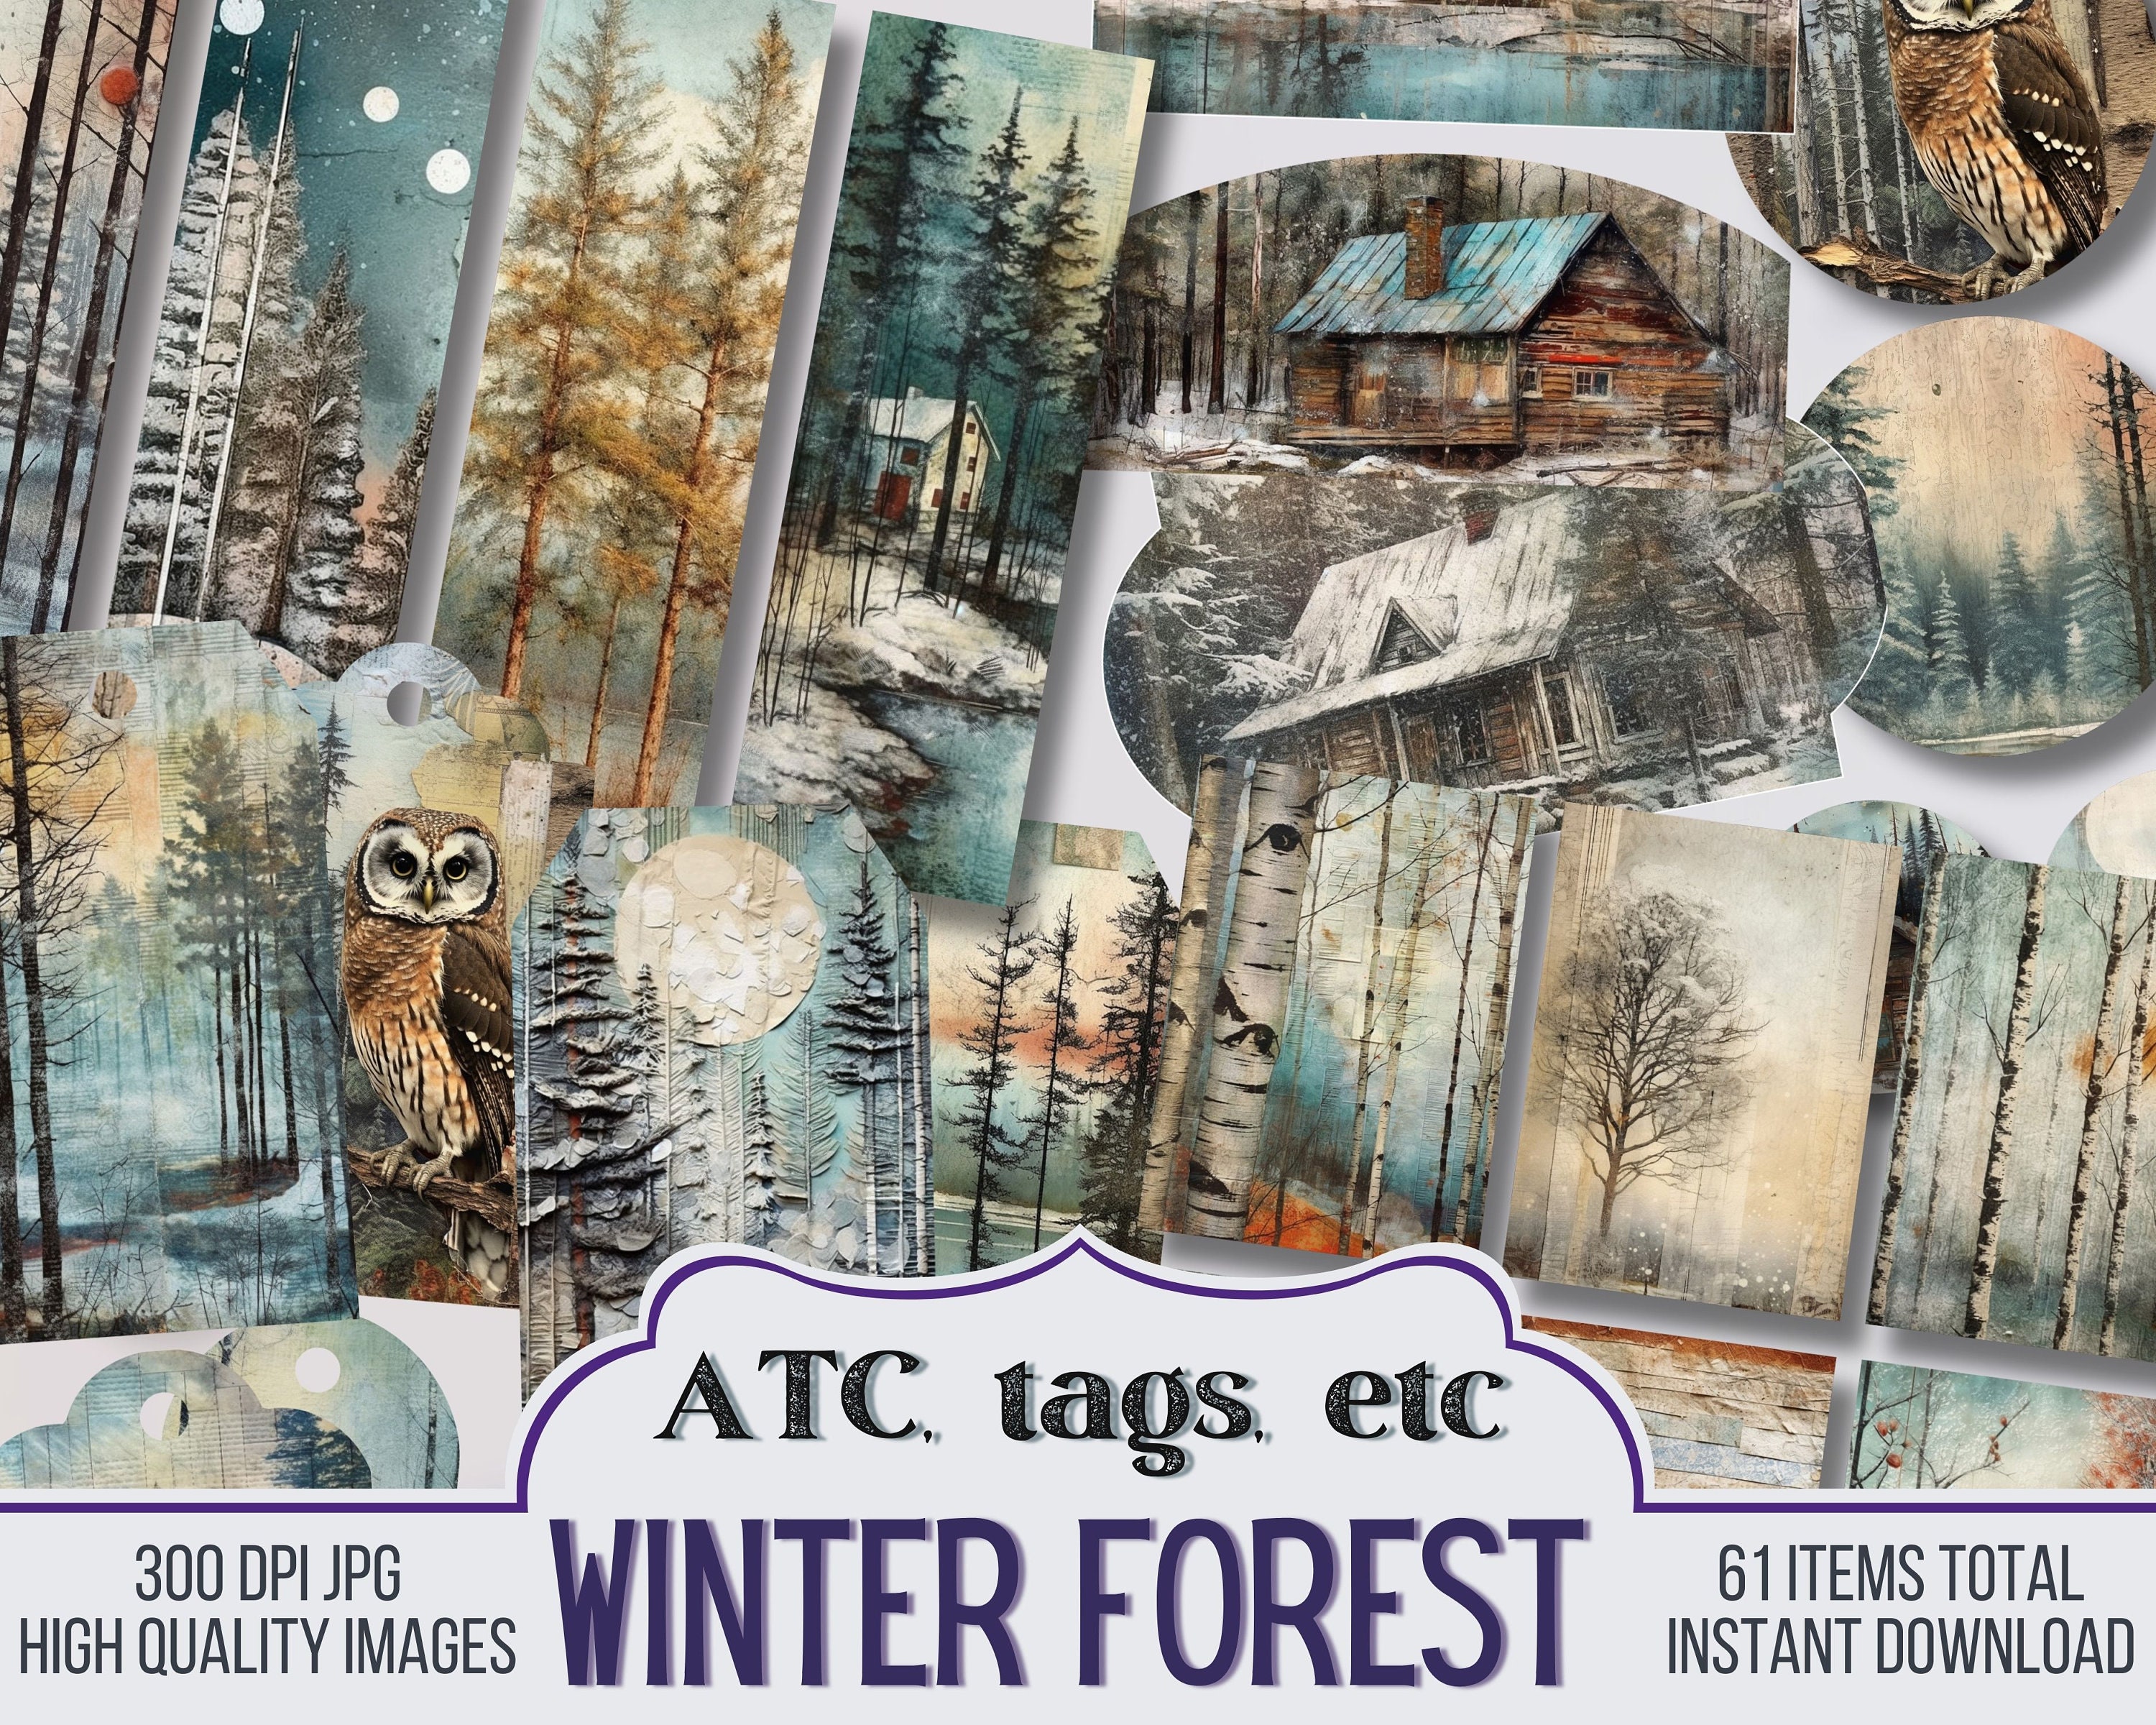 Winter Digital Paper, Winter Scrapbook Paper, Snow, Winter, Christmas,  Trees, Snow Fall, Backgrounds, Digital Paper, Scrapbook, DOWNLOAD 